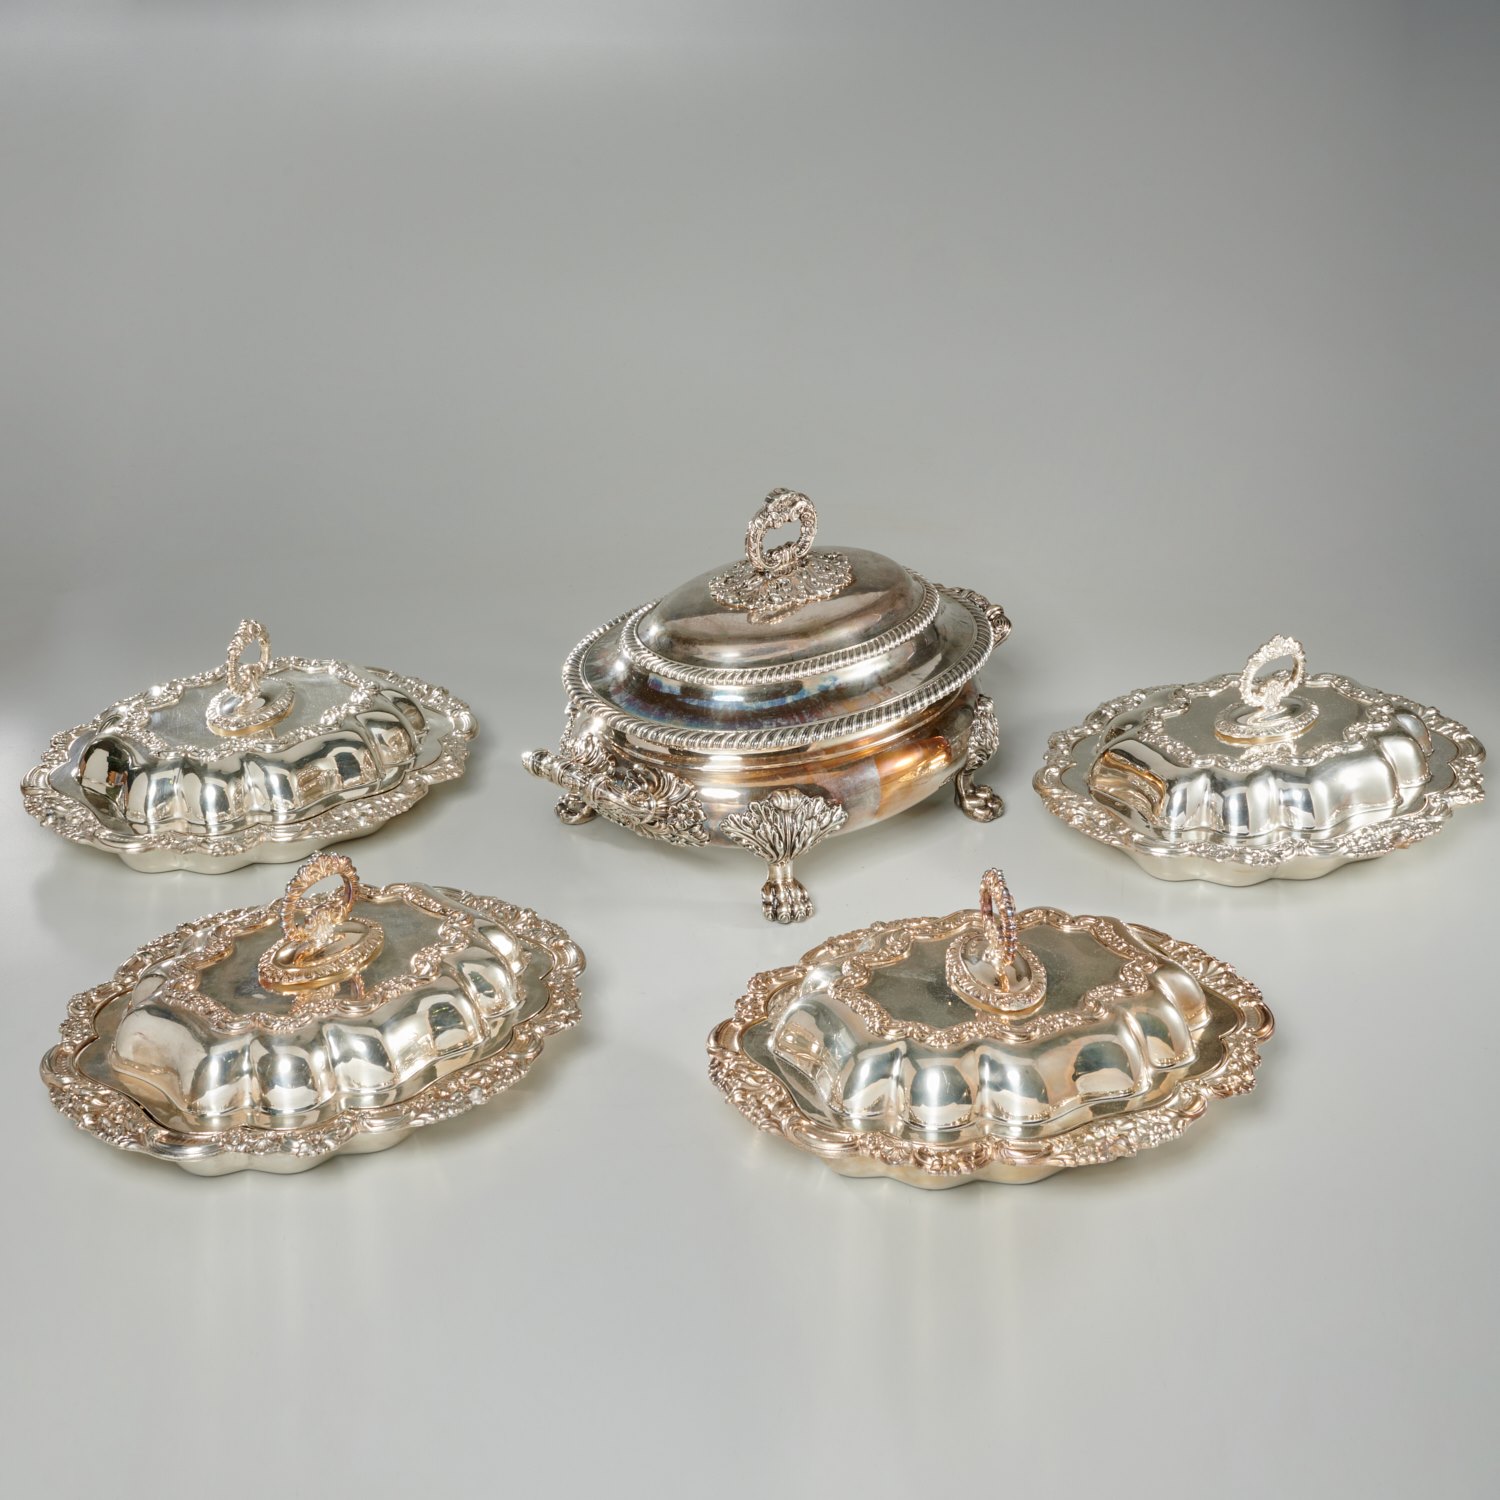 (5) ANTIQUE ENGLISH SILVER PLATED